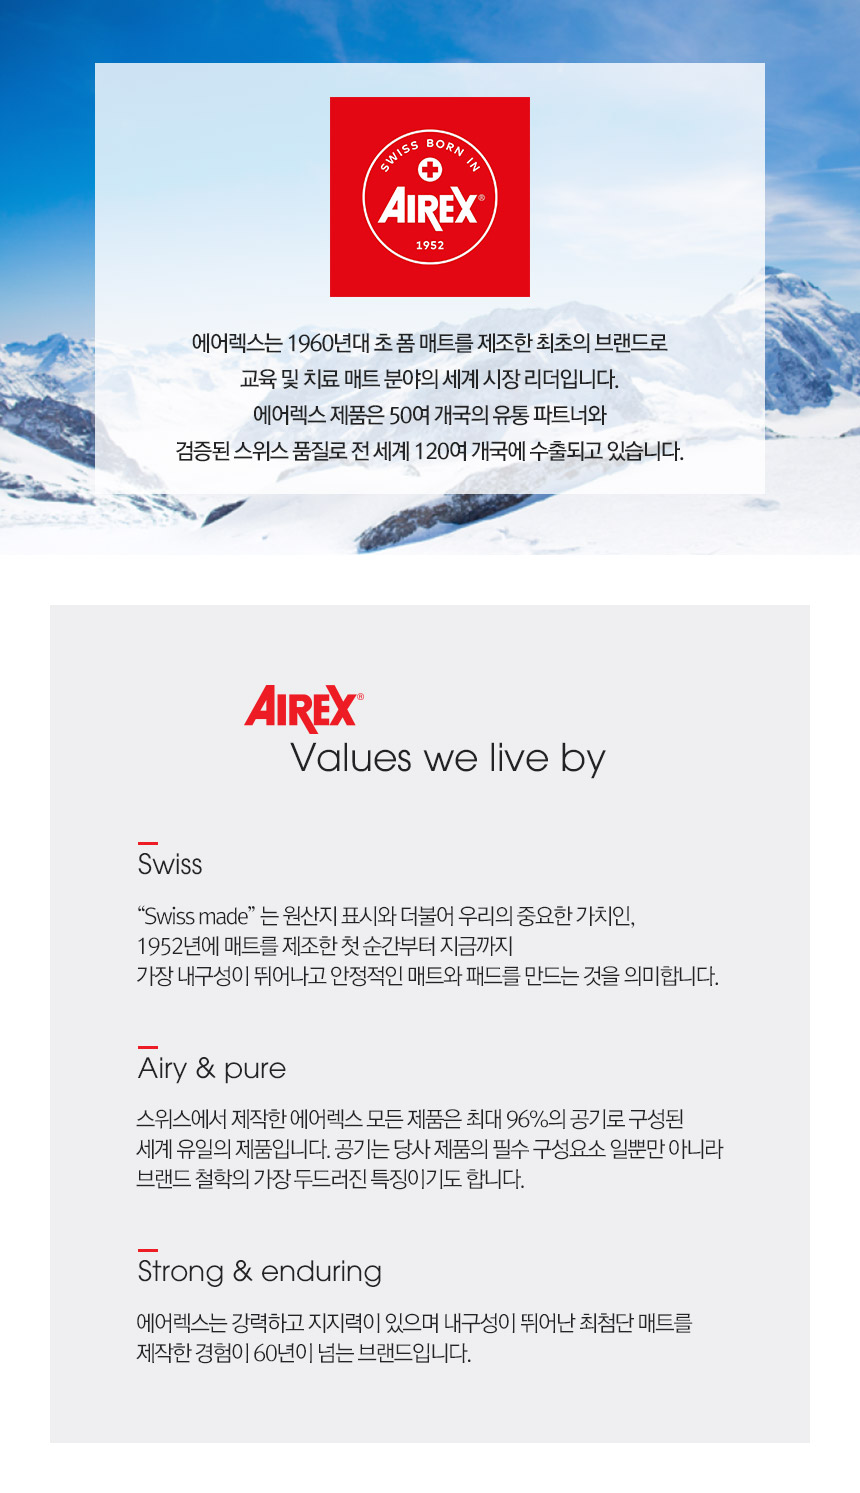 airex_about_143210.jpg